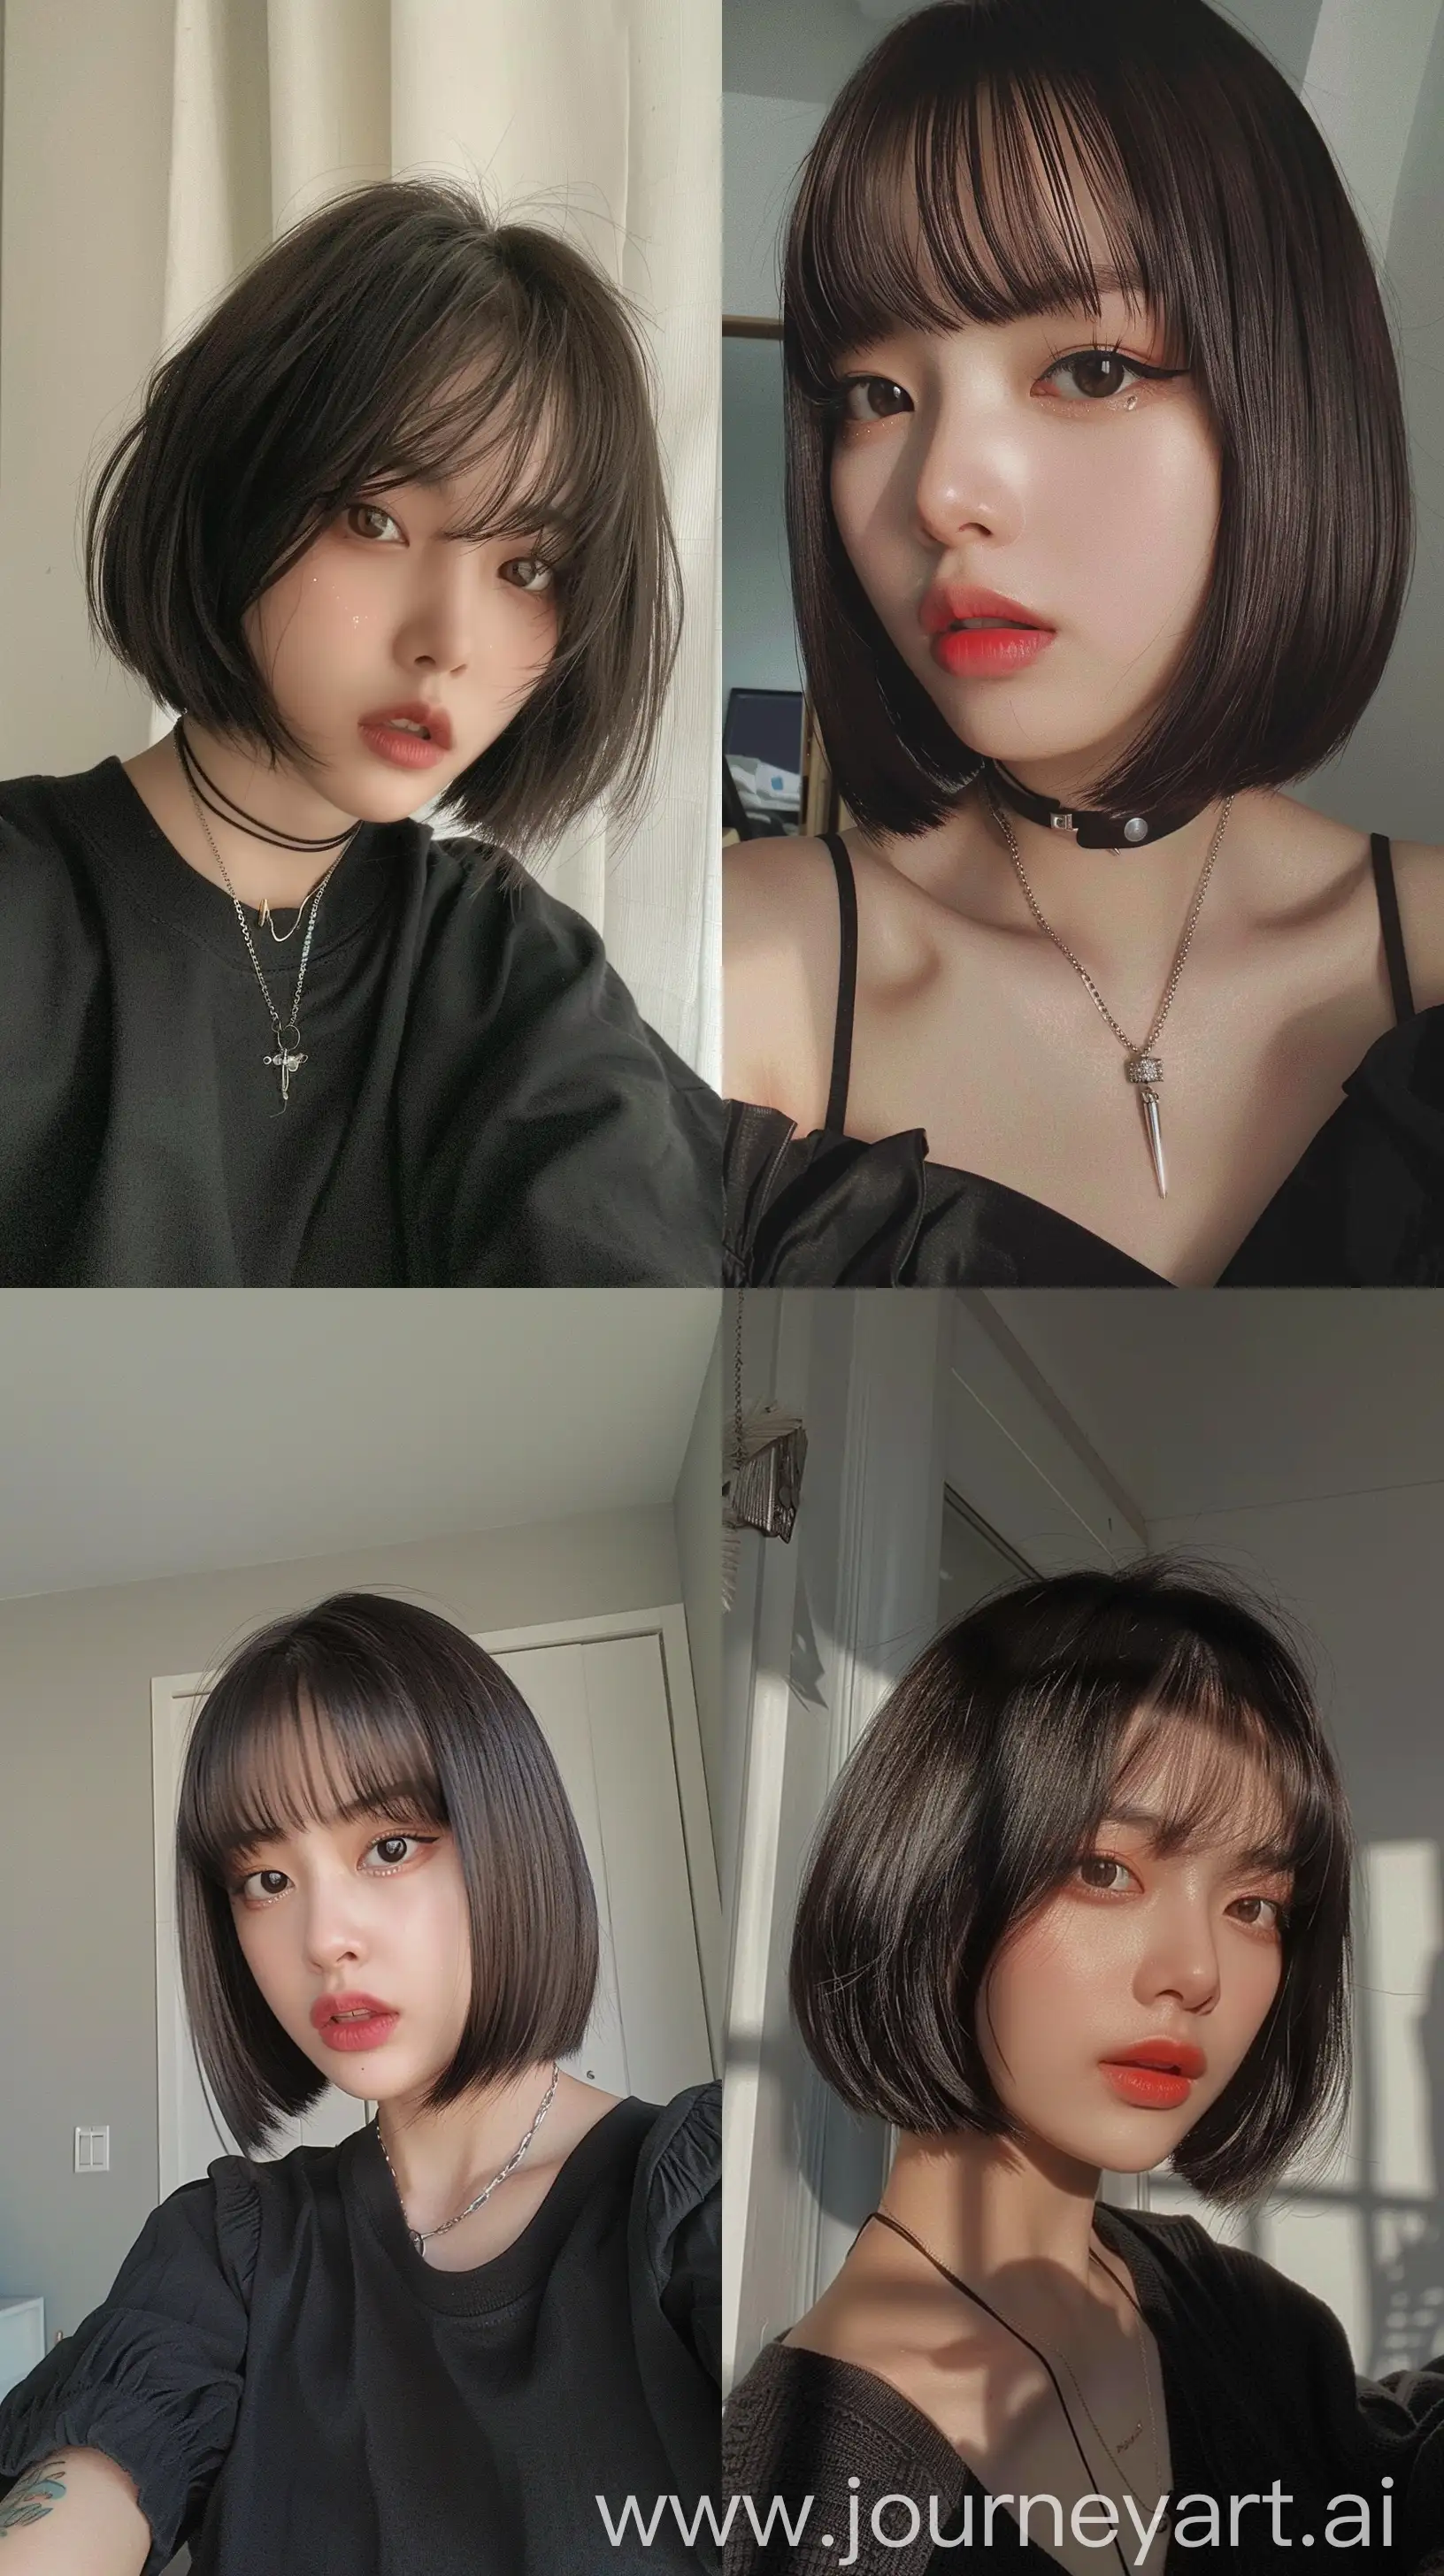 a aestethic selfie korean cute girl, face feature like blackpink's jennie, bob hair with bangs, aestethic make up, hotly aestethic --ar 9:16